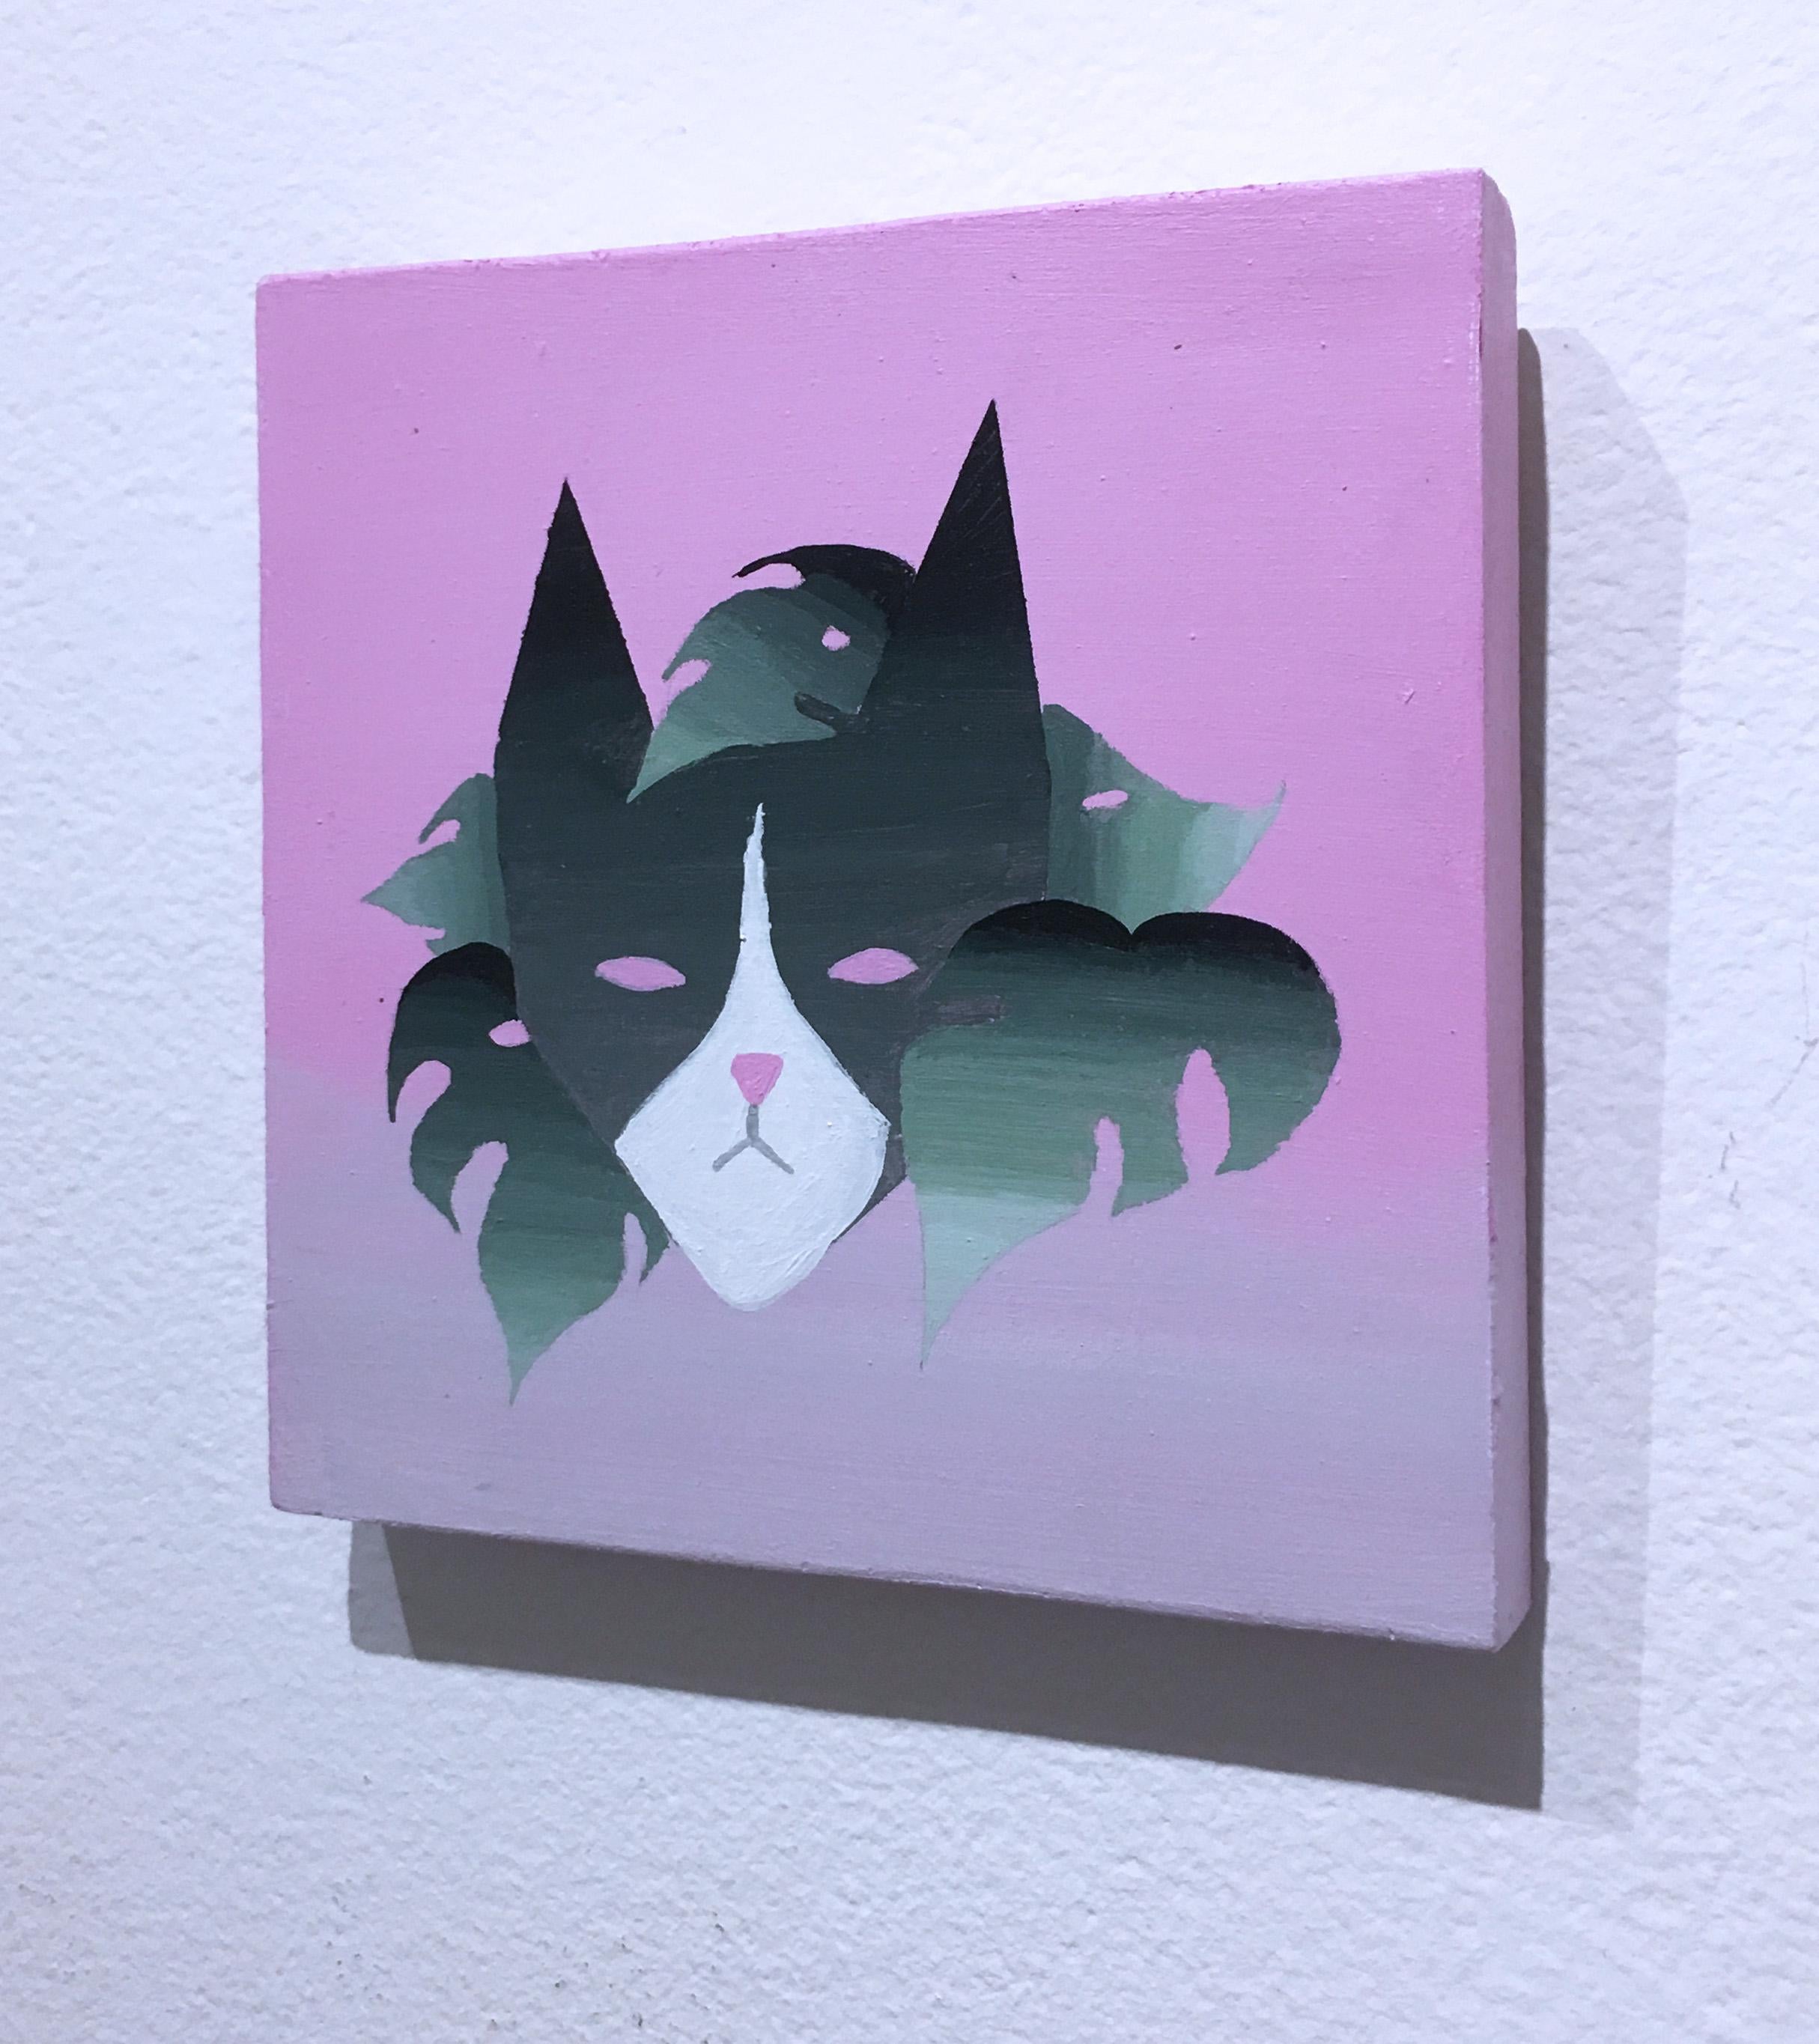 Is Cat Enough by Keith Garcia (2021) Small pink cat painting, monstera plant 2